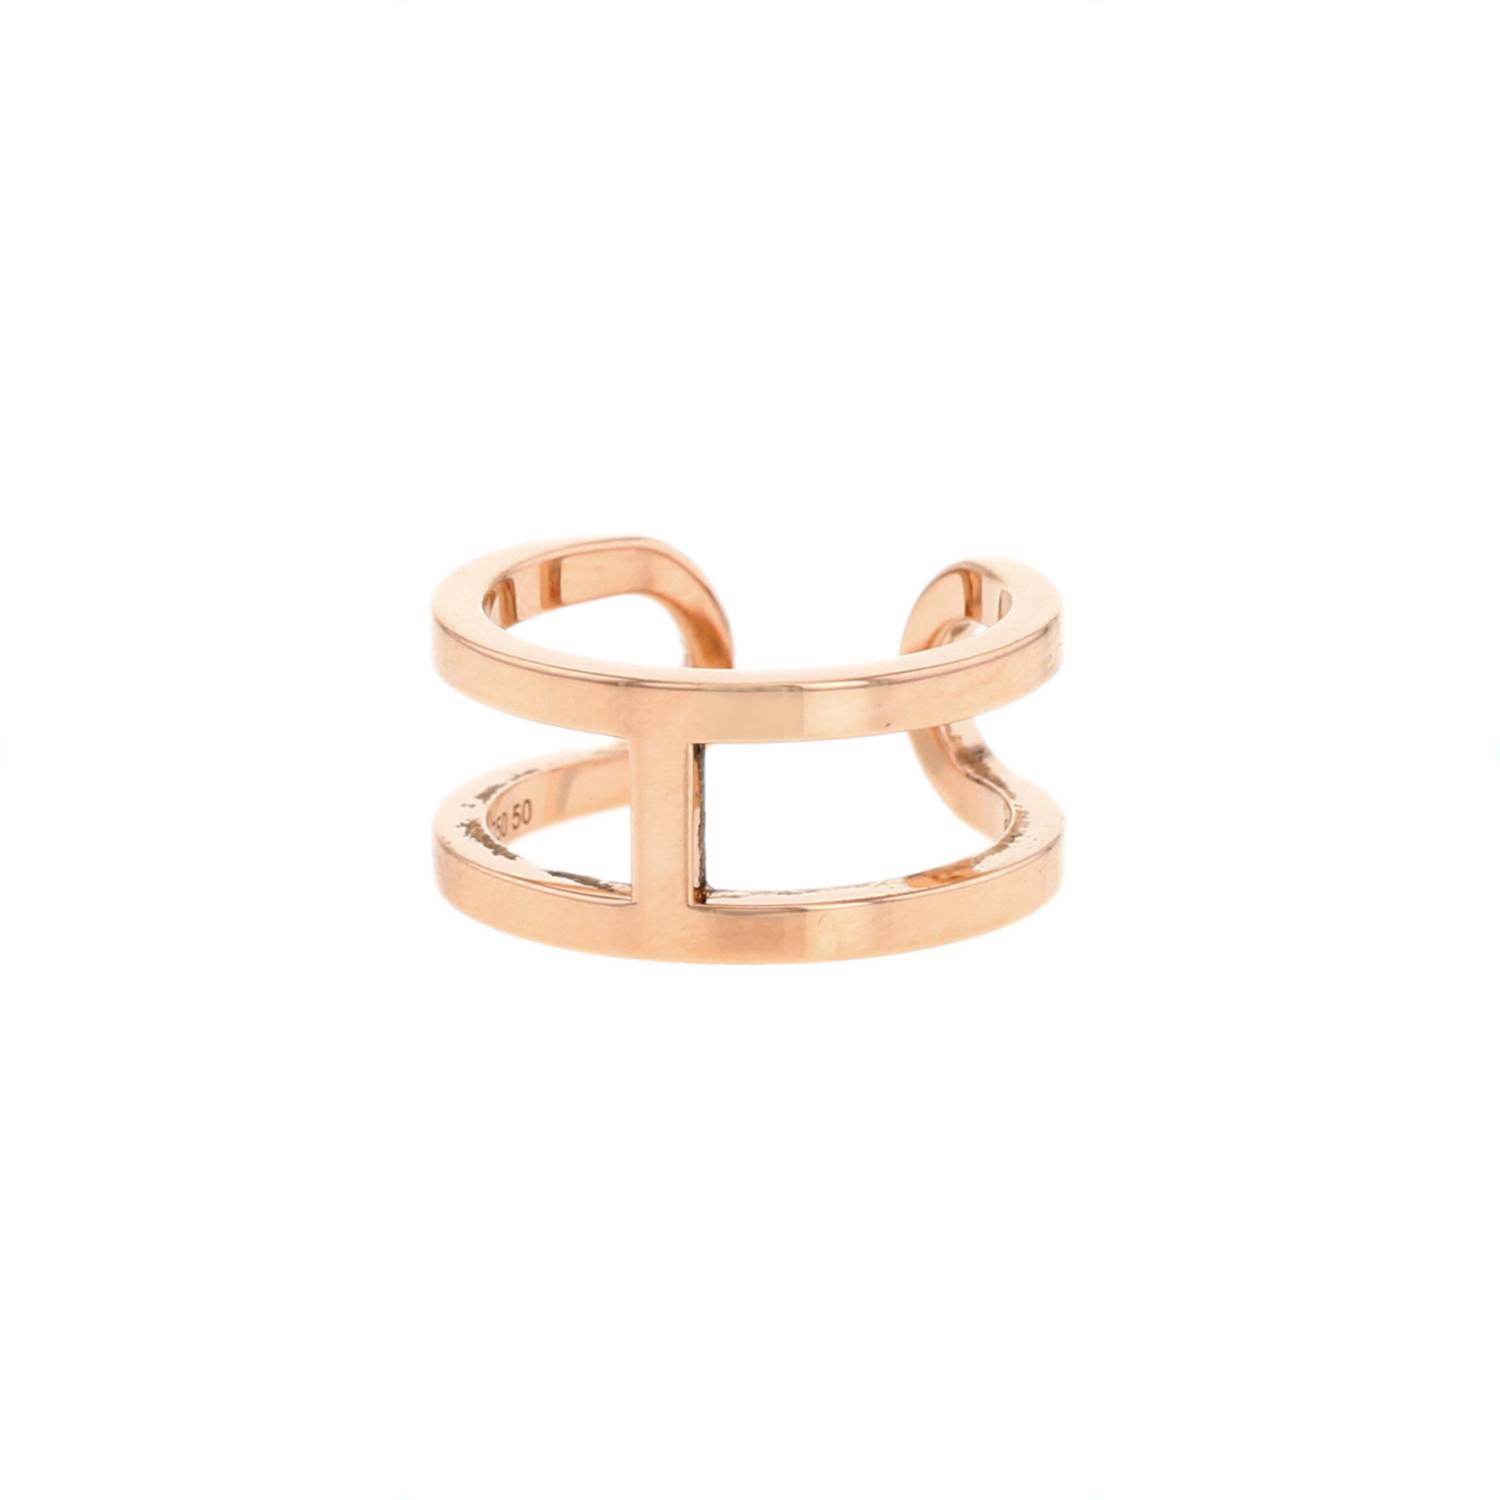 HERMES CHAINE D'ANCRE Scarf Ring Gold color hardware